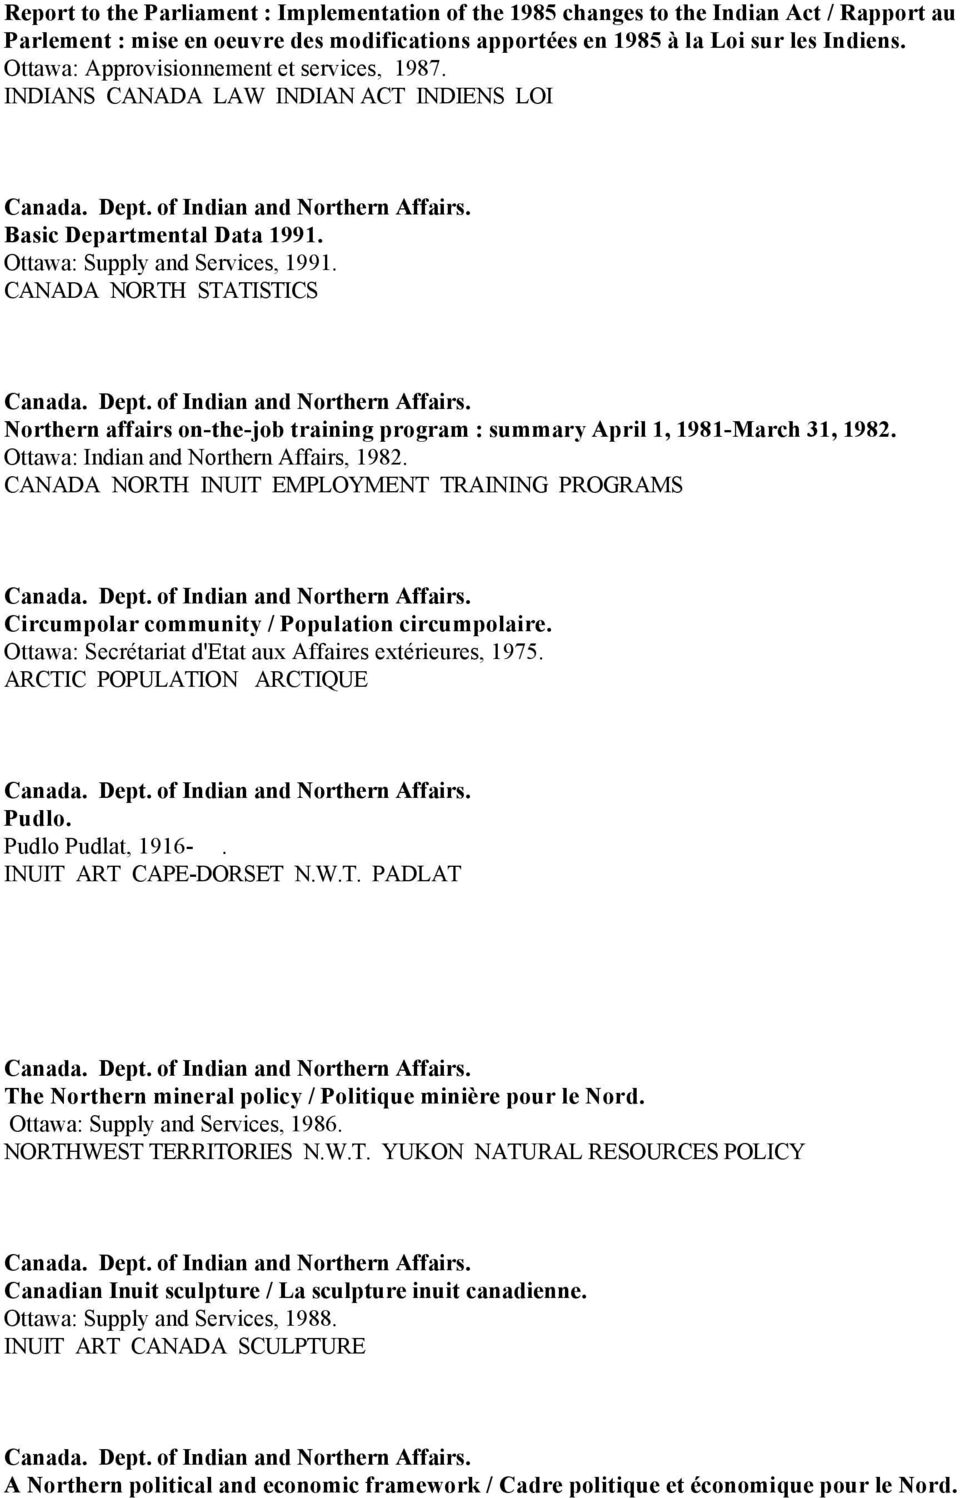 CANADA NORTH STATISTICS Canada. Dept. of Indian and Northern Affairs. Northern affairs on-the-job training program : summary April 1, 1981-March 31, 1982. Ottawa: Indian and Northern Affairs, 1982.